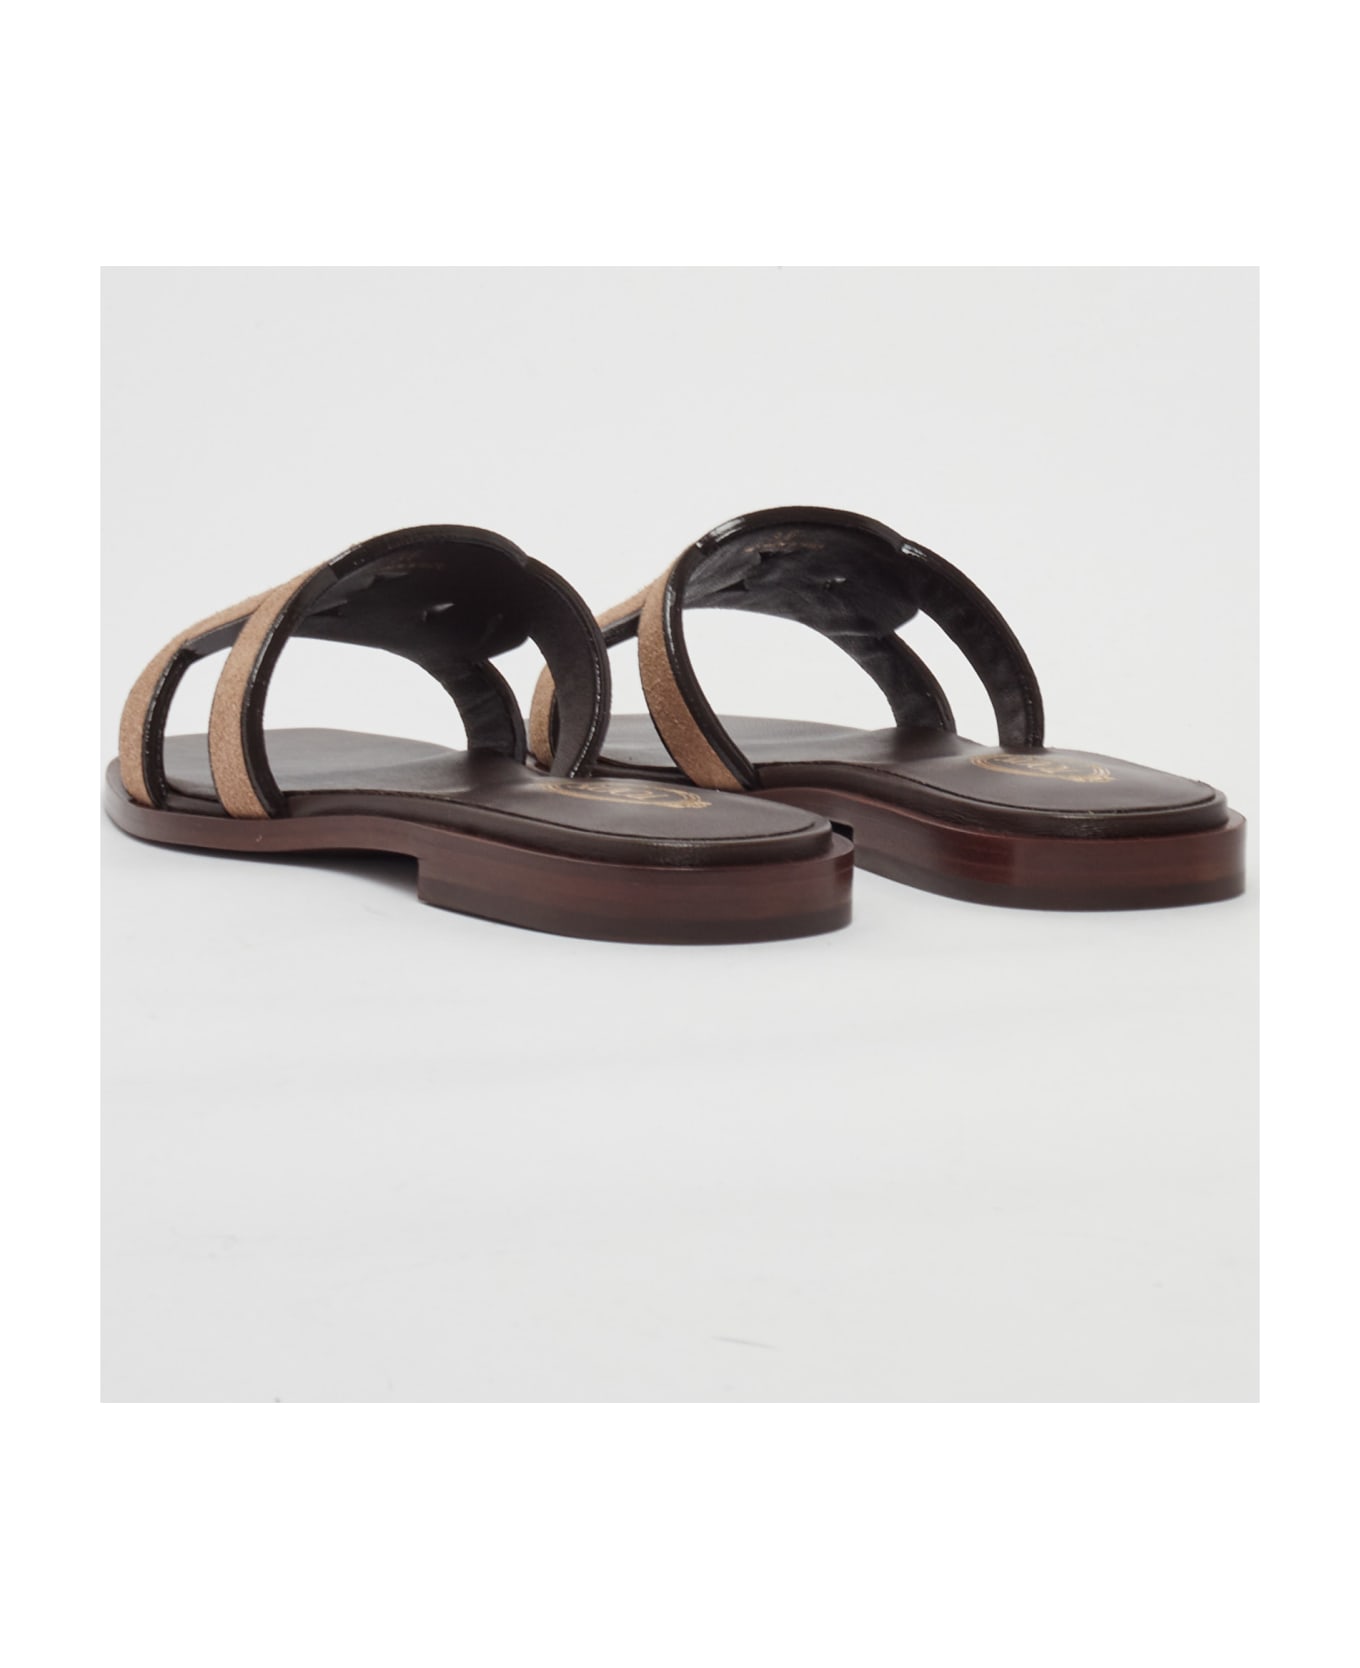 Tod's Biscuit Suede Slippers - MARRONE CHIARO サンダル